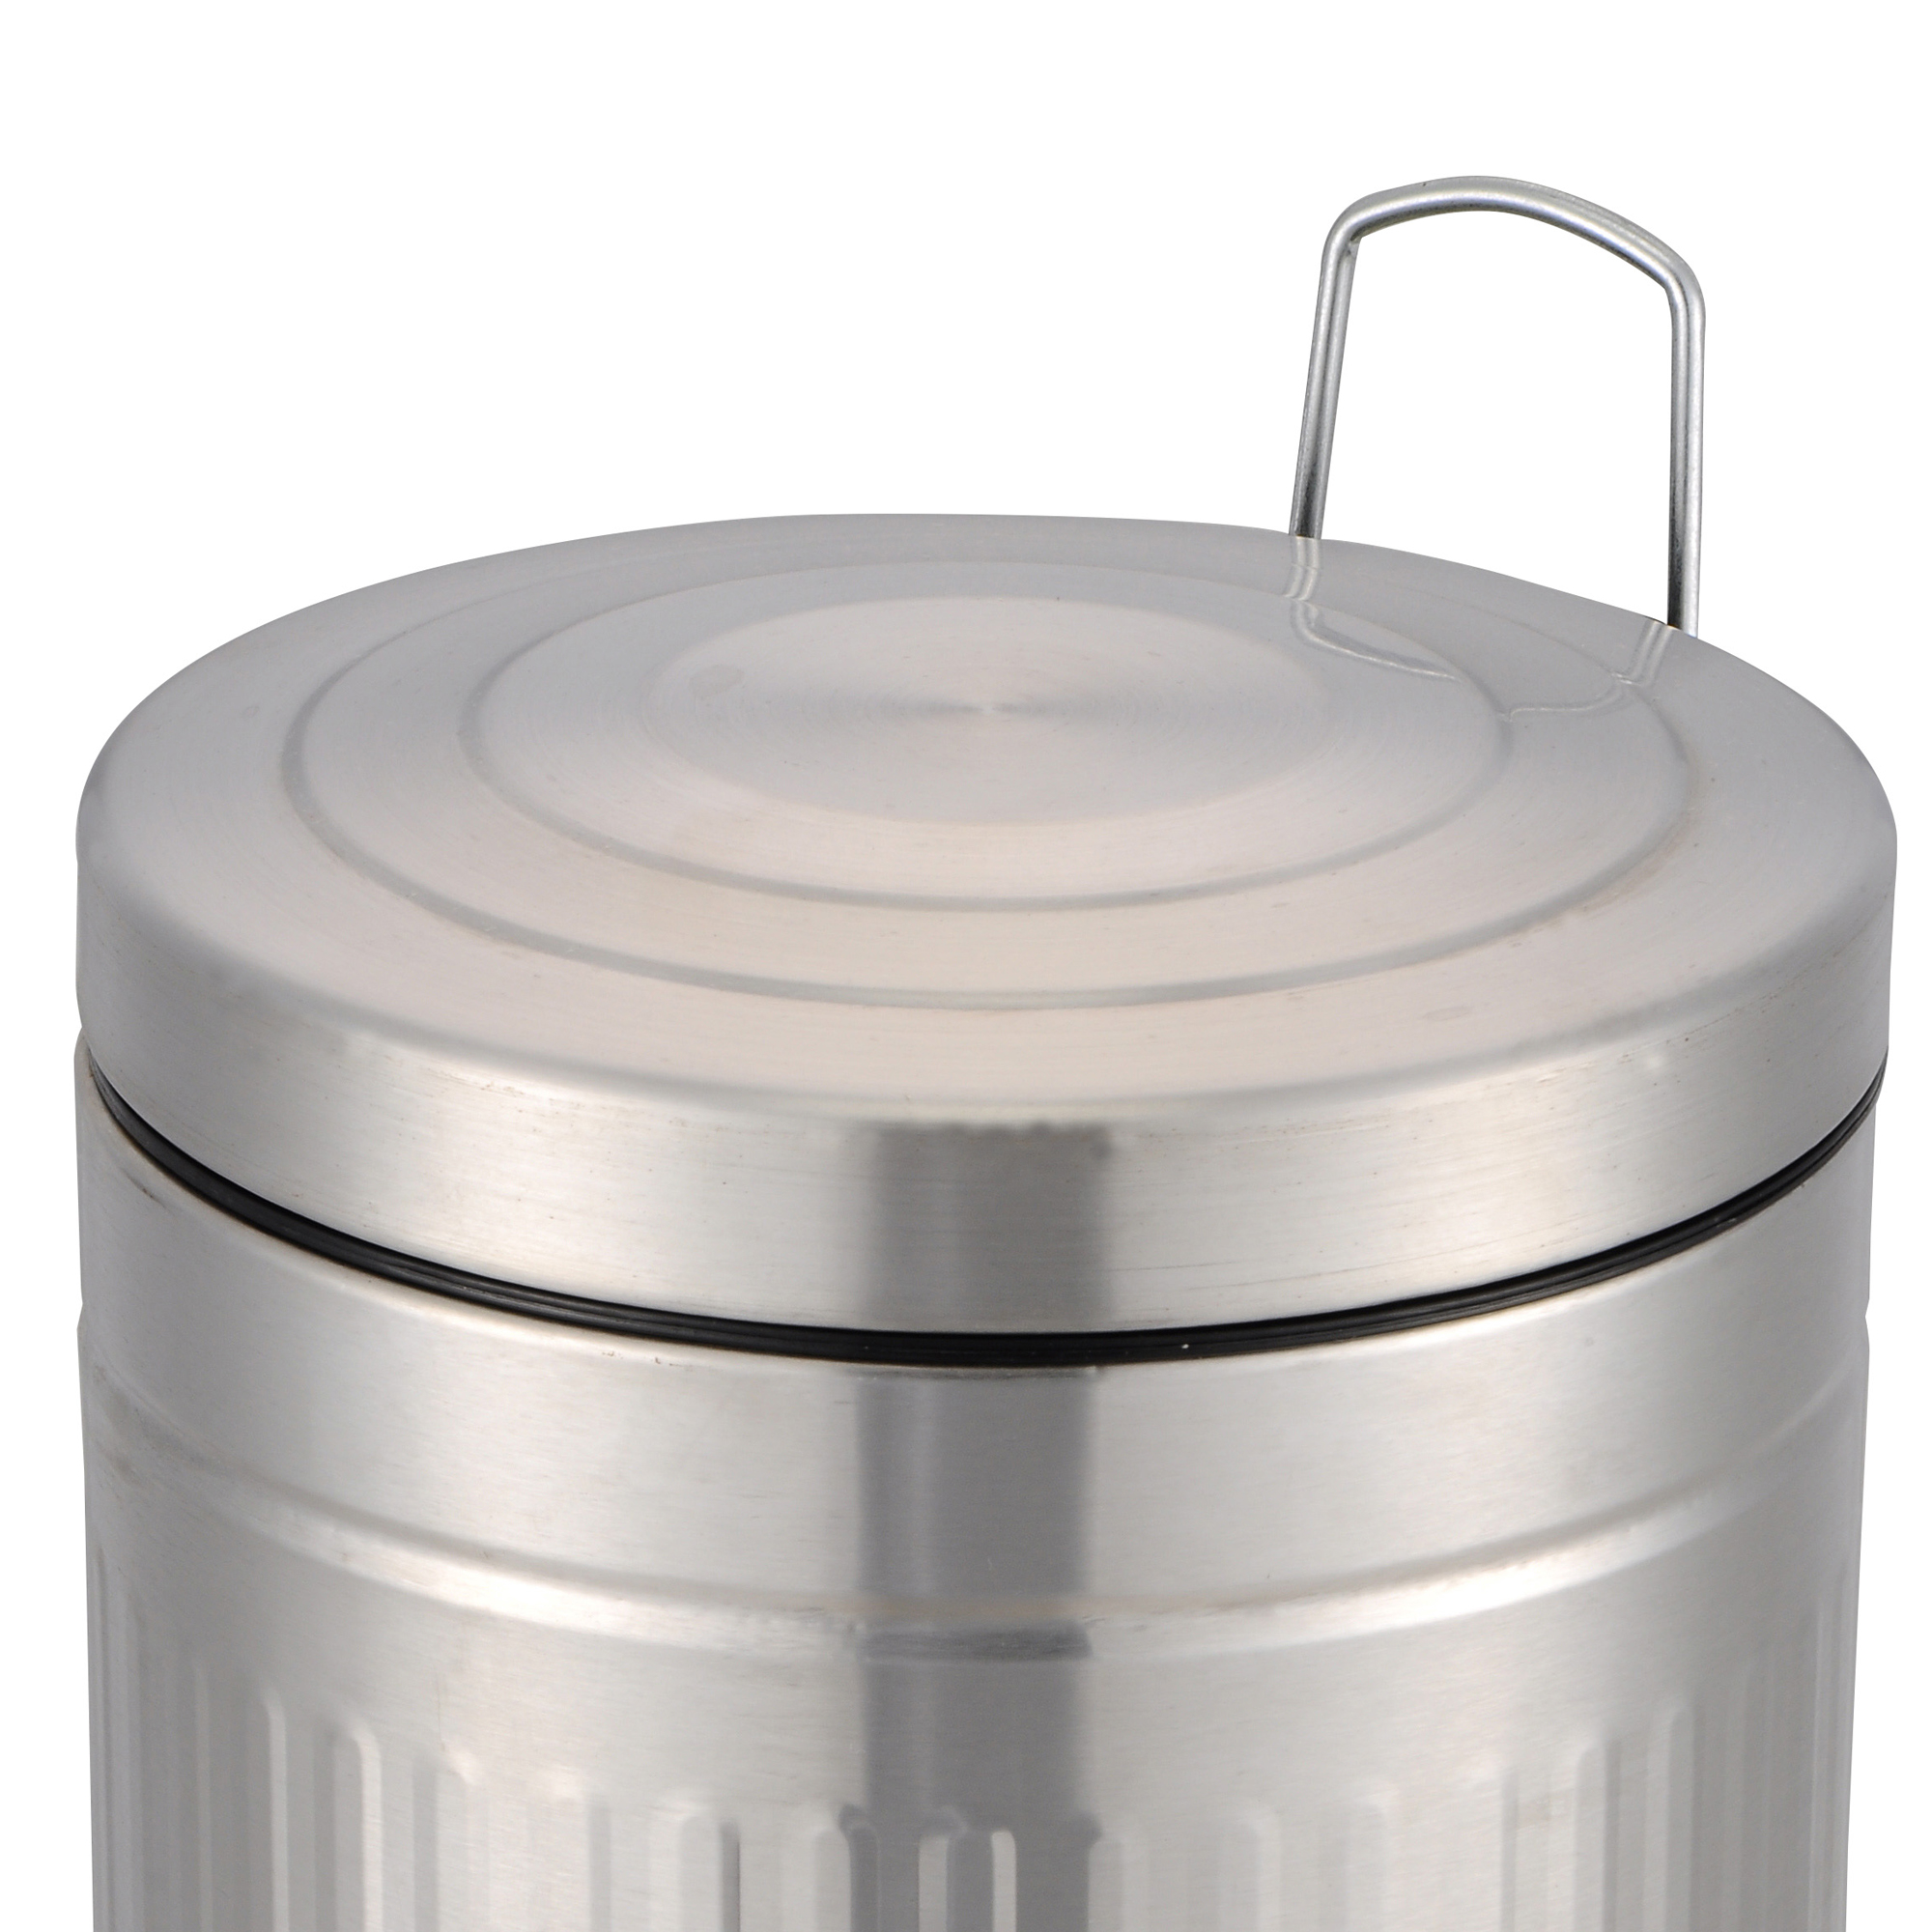 Stainless Steel Pedal dustbin